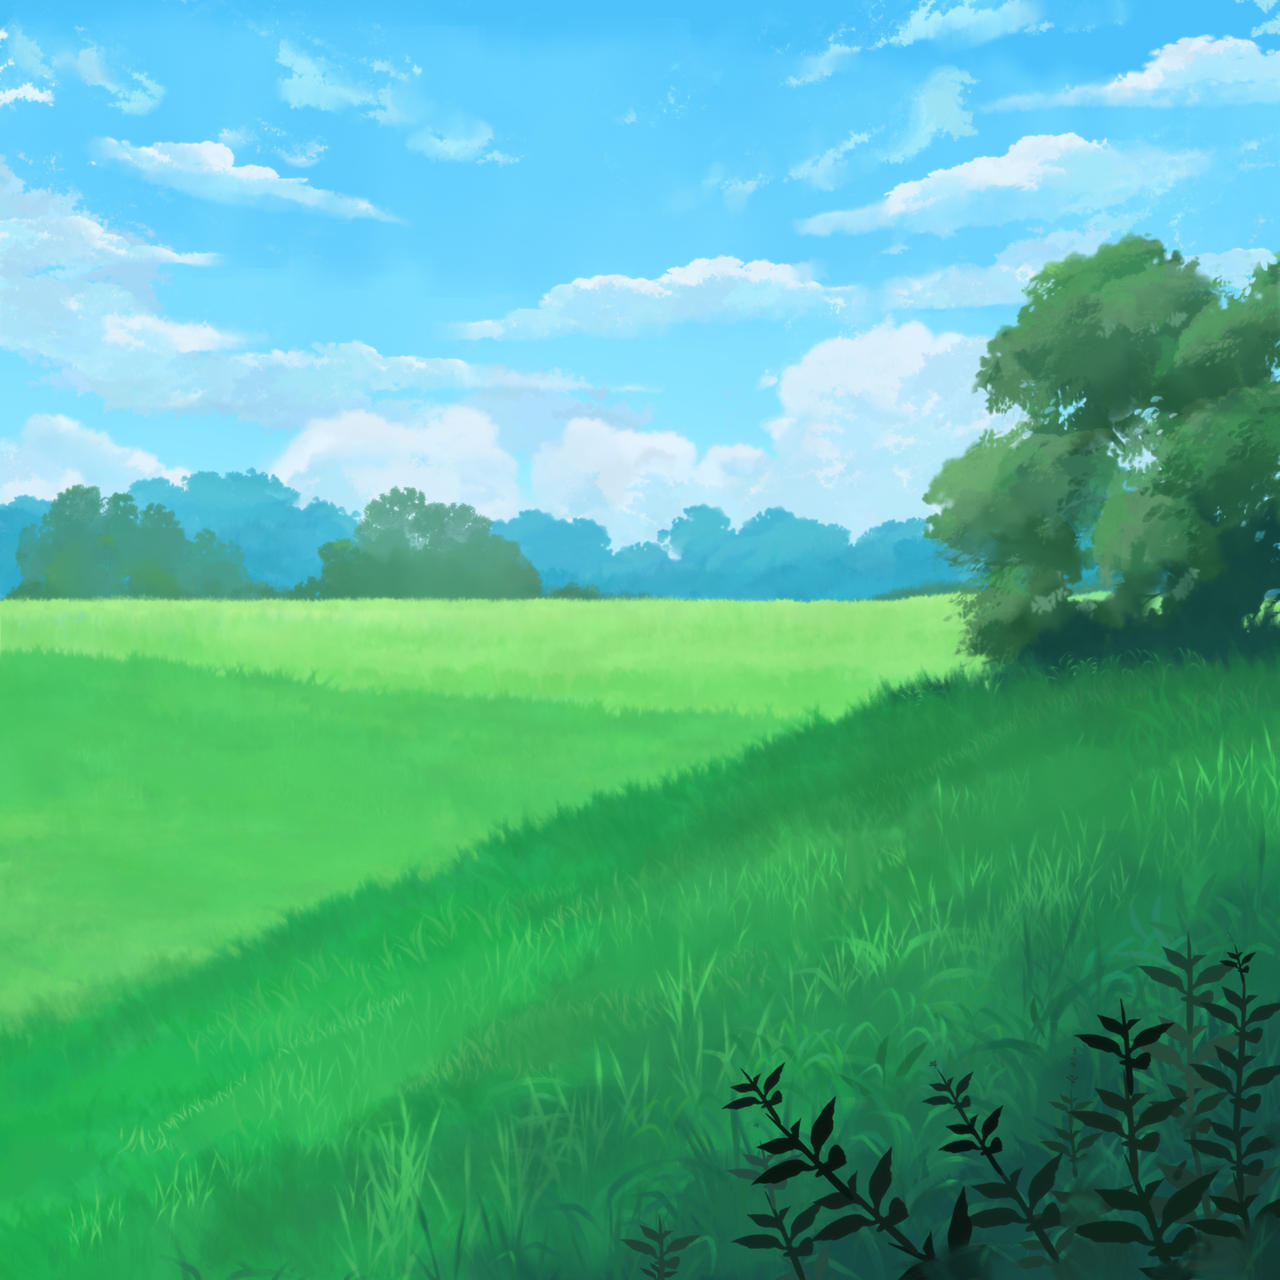 Quick landscape painting by mclelun on DeviantArt